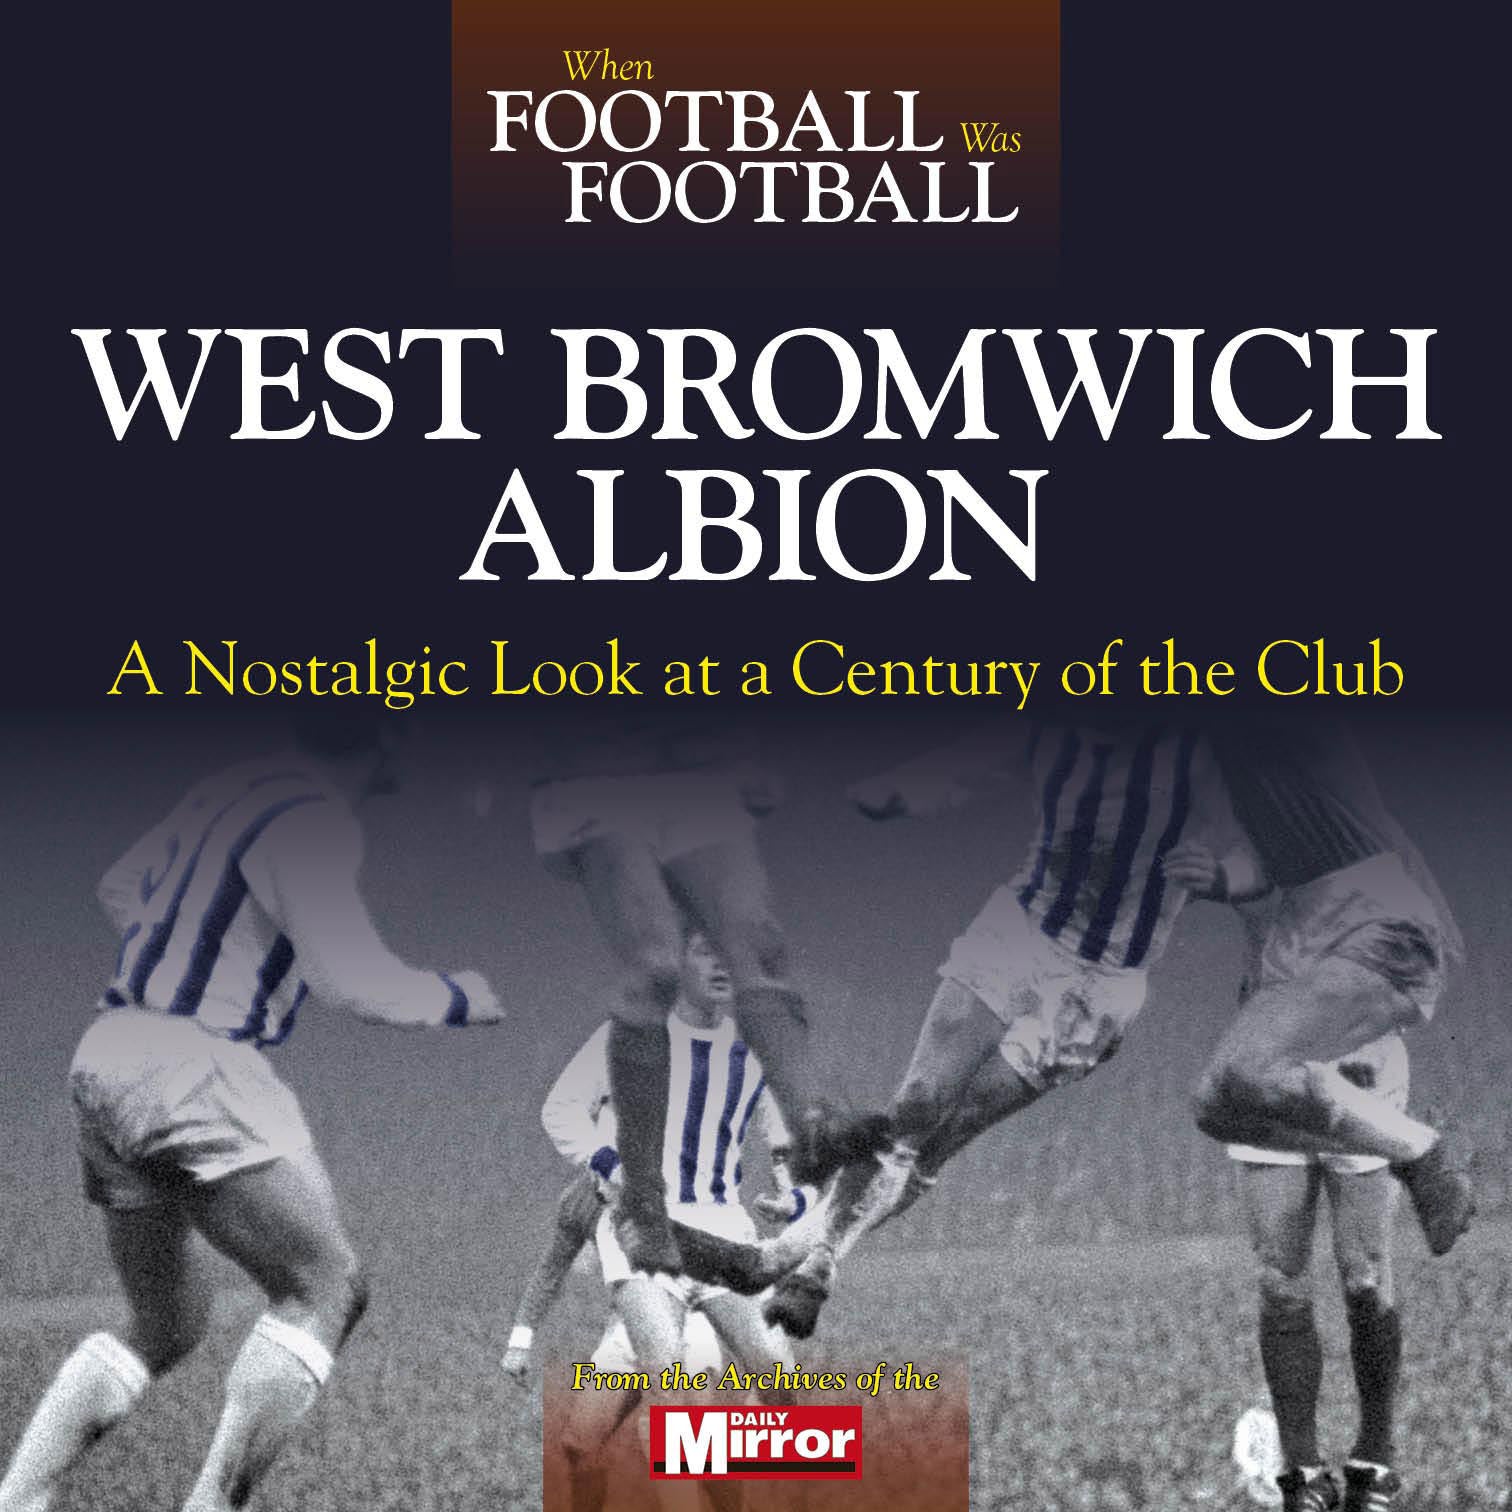 When Football Was Football – West Bromwich Albion – A Nostalgic Look at a Century of the Club